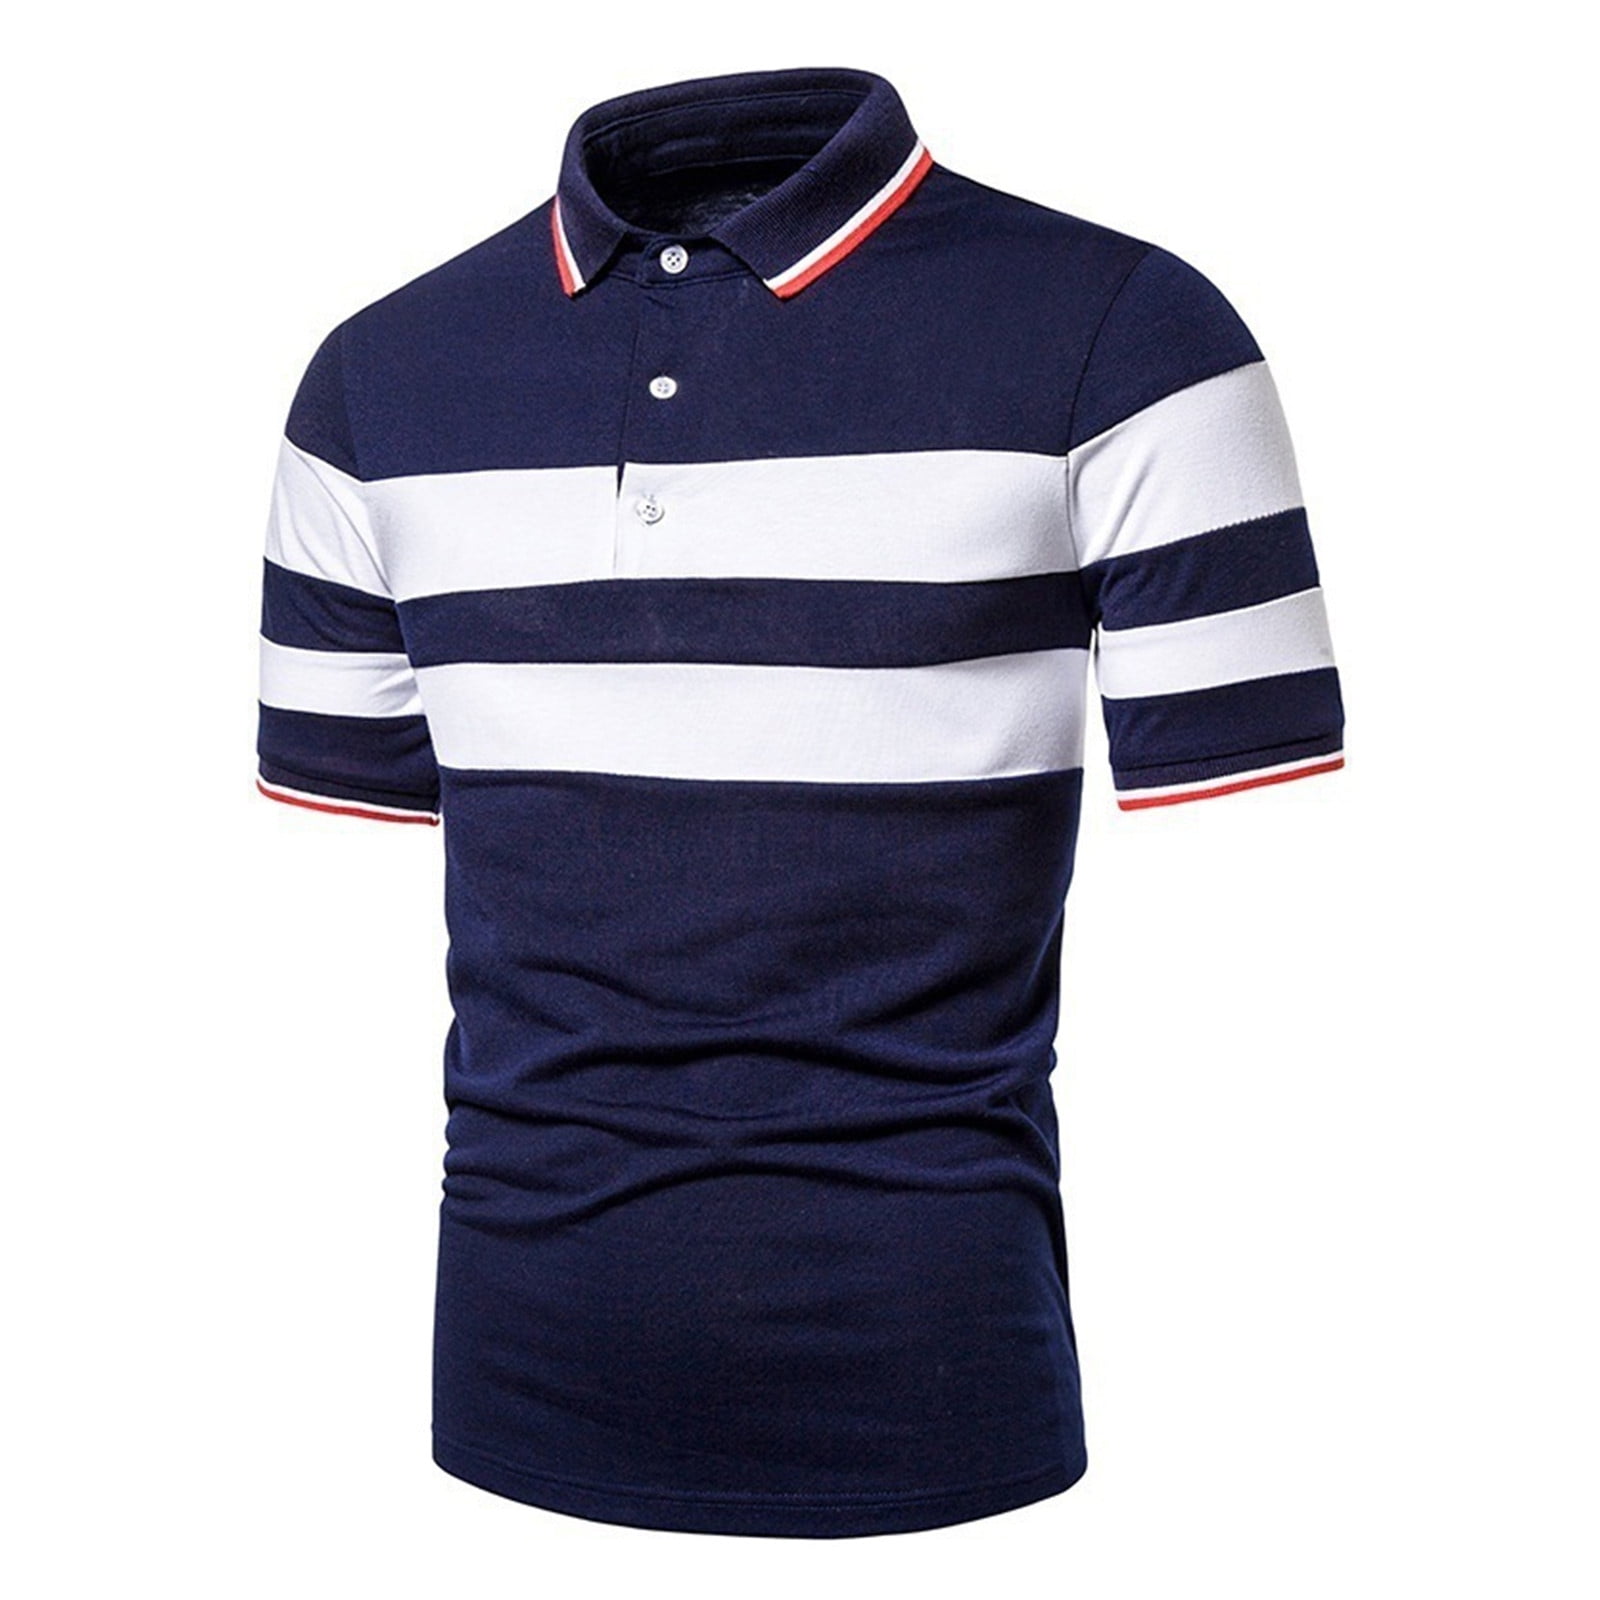 Mens Polo Shirts with Collar Striped Men'S Clothing Splicing Fashion ...